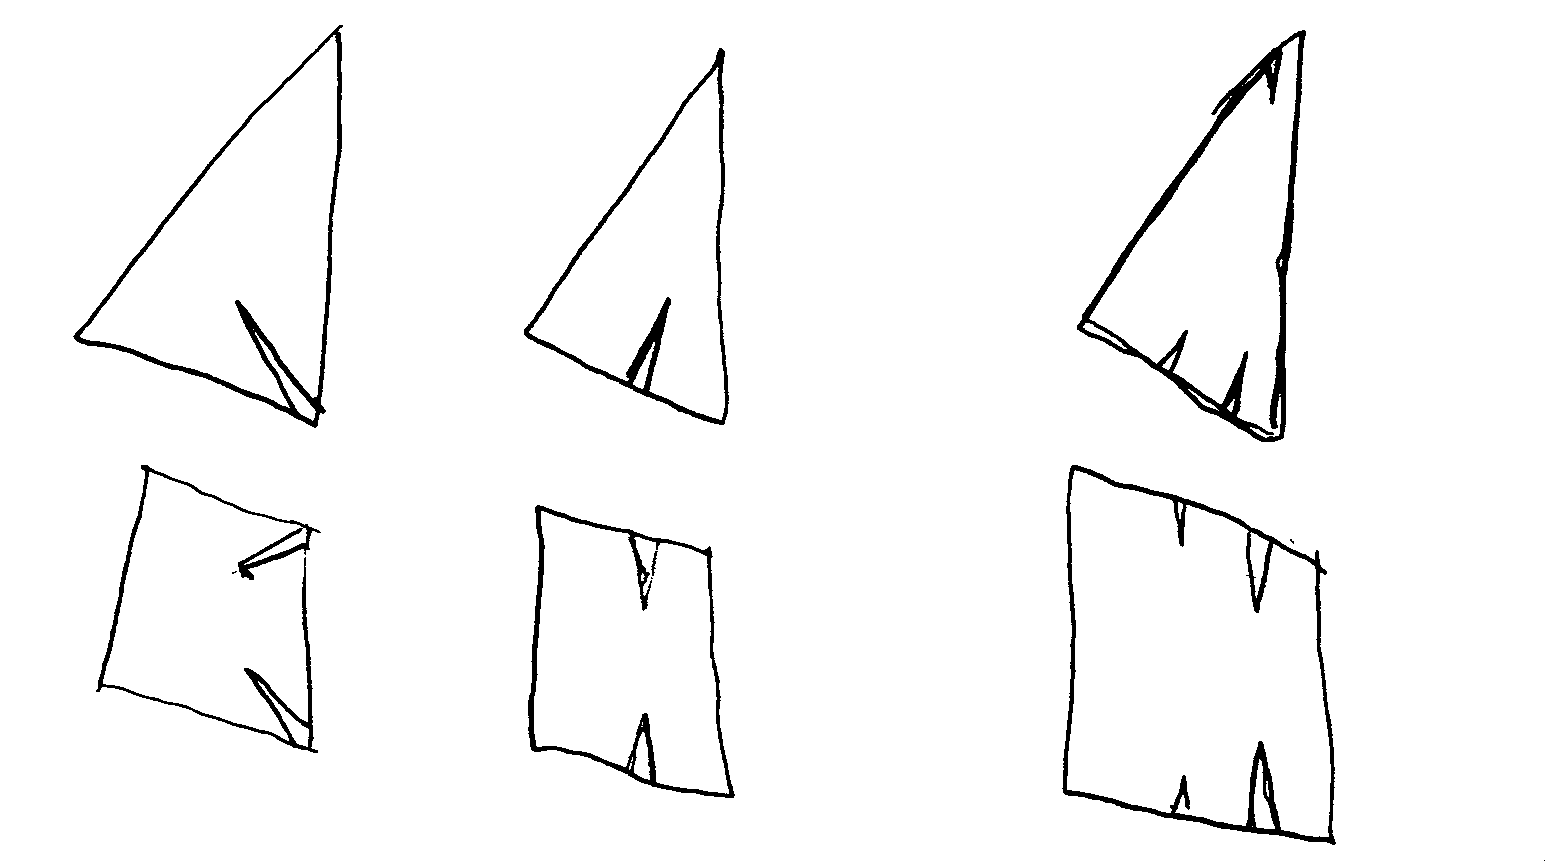 other dart patterns for shaping sails